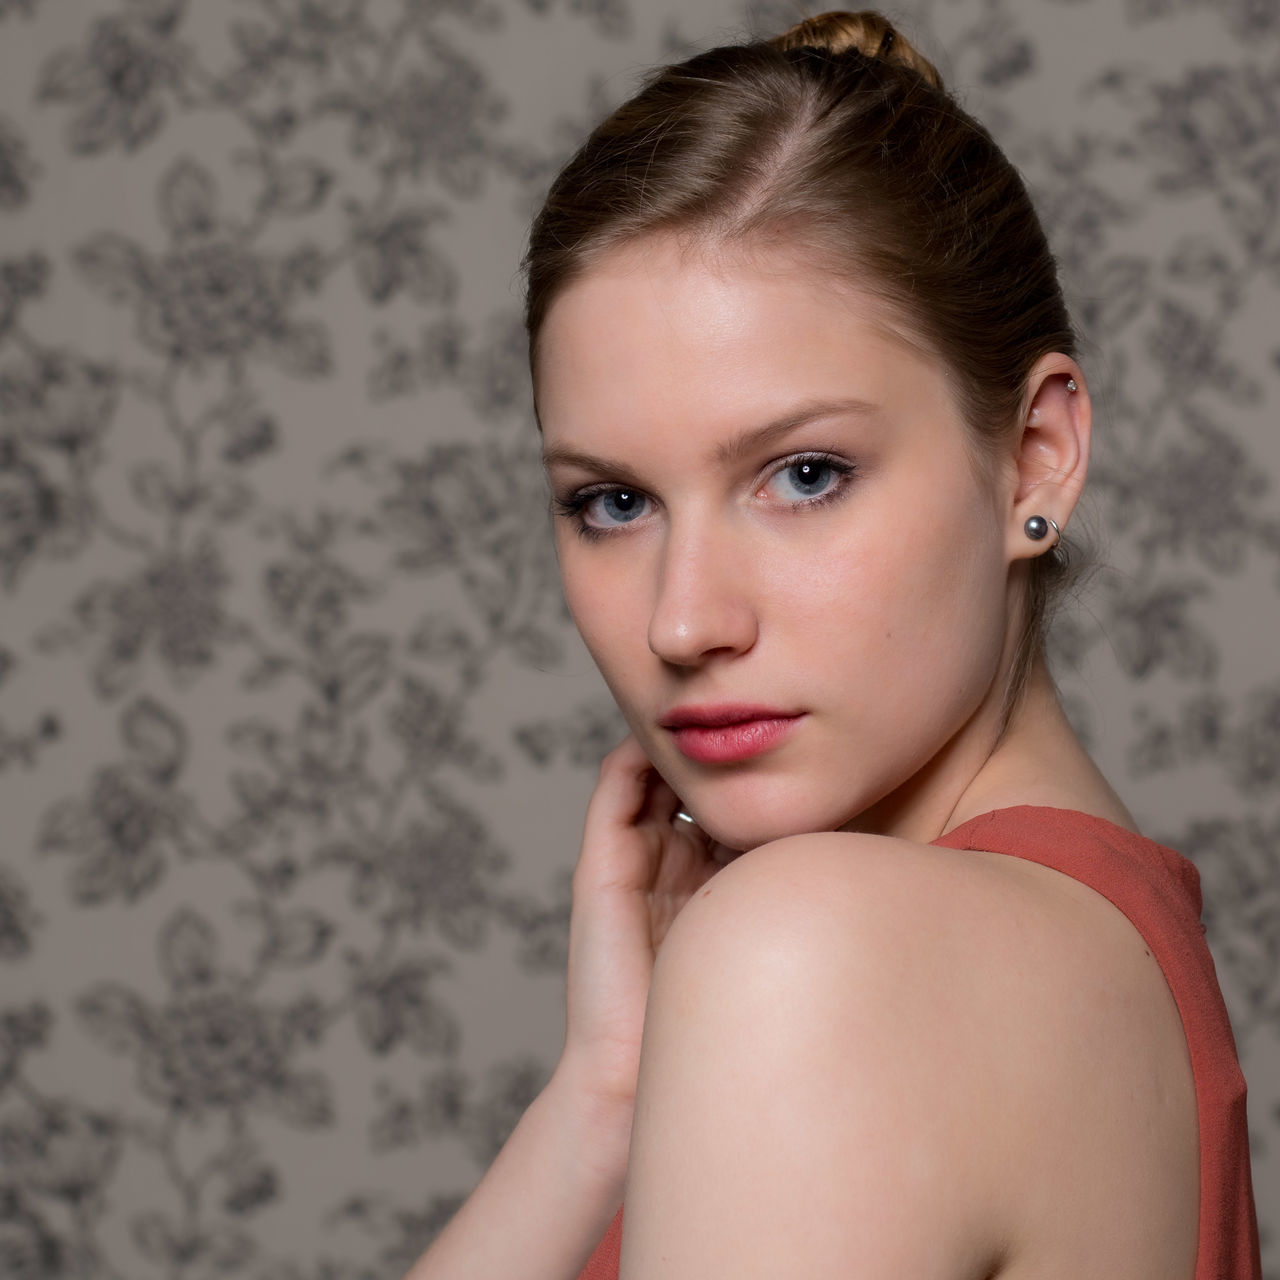 portrait, human hair, women, one person, adult, looking at camera, hairstyle, human face, young adult, indoors, fashion, headshot, studio shot, skin, long hair, portrait photography, blond hair, brown hair, female, photo shoot, elegance, make-up, serious, eyebrow, lip, person, blue eyes, glamour, human eye, eye, human head, chignon, clothing, emotion